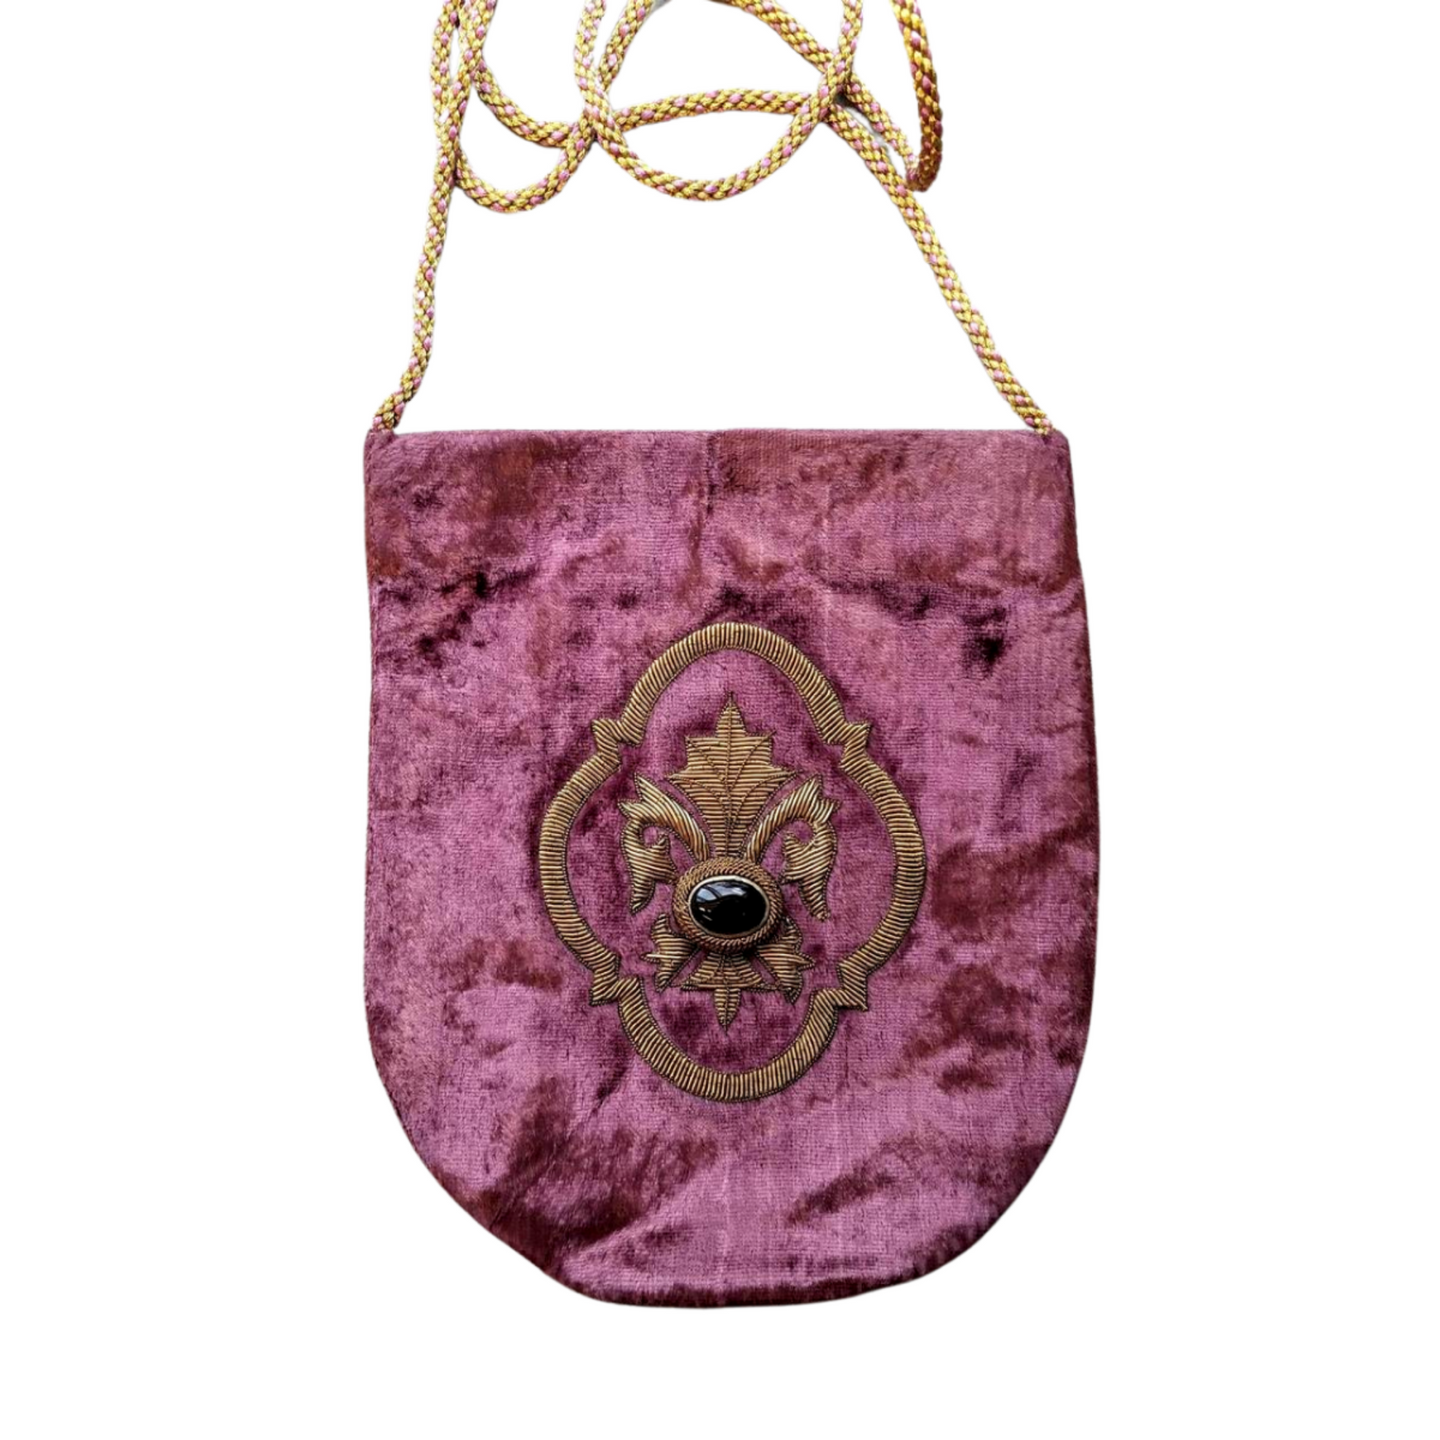 Fleur de lys embroidered on purple crossbody bag with onyx stone. 